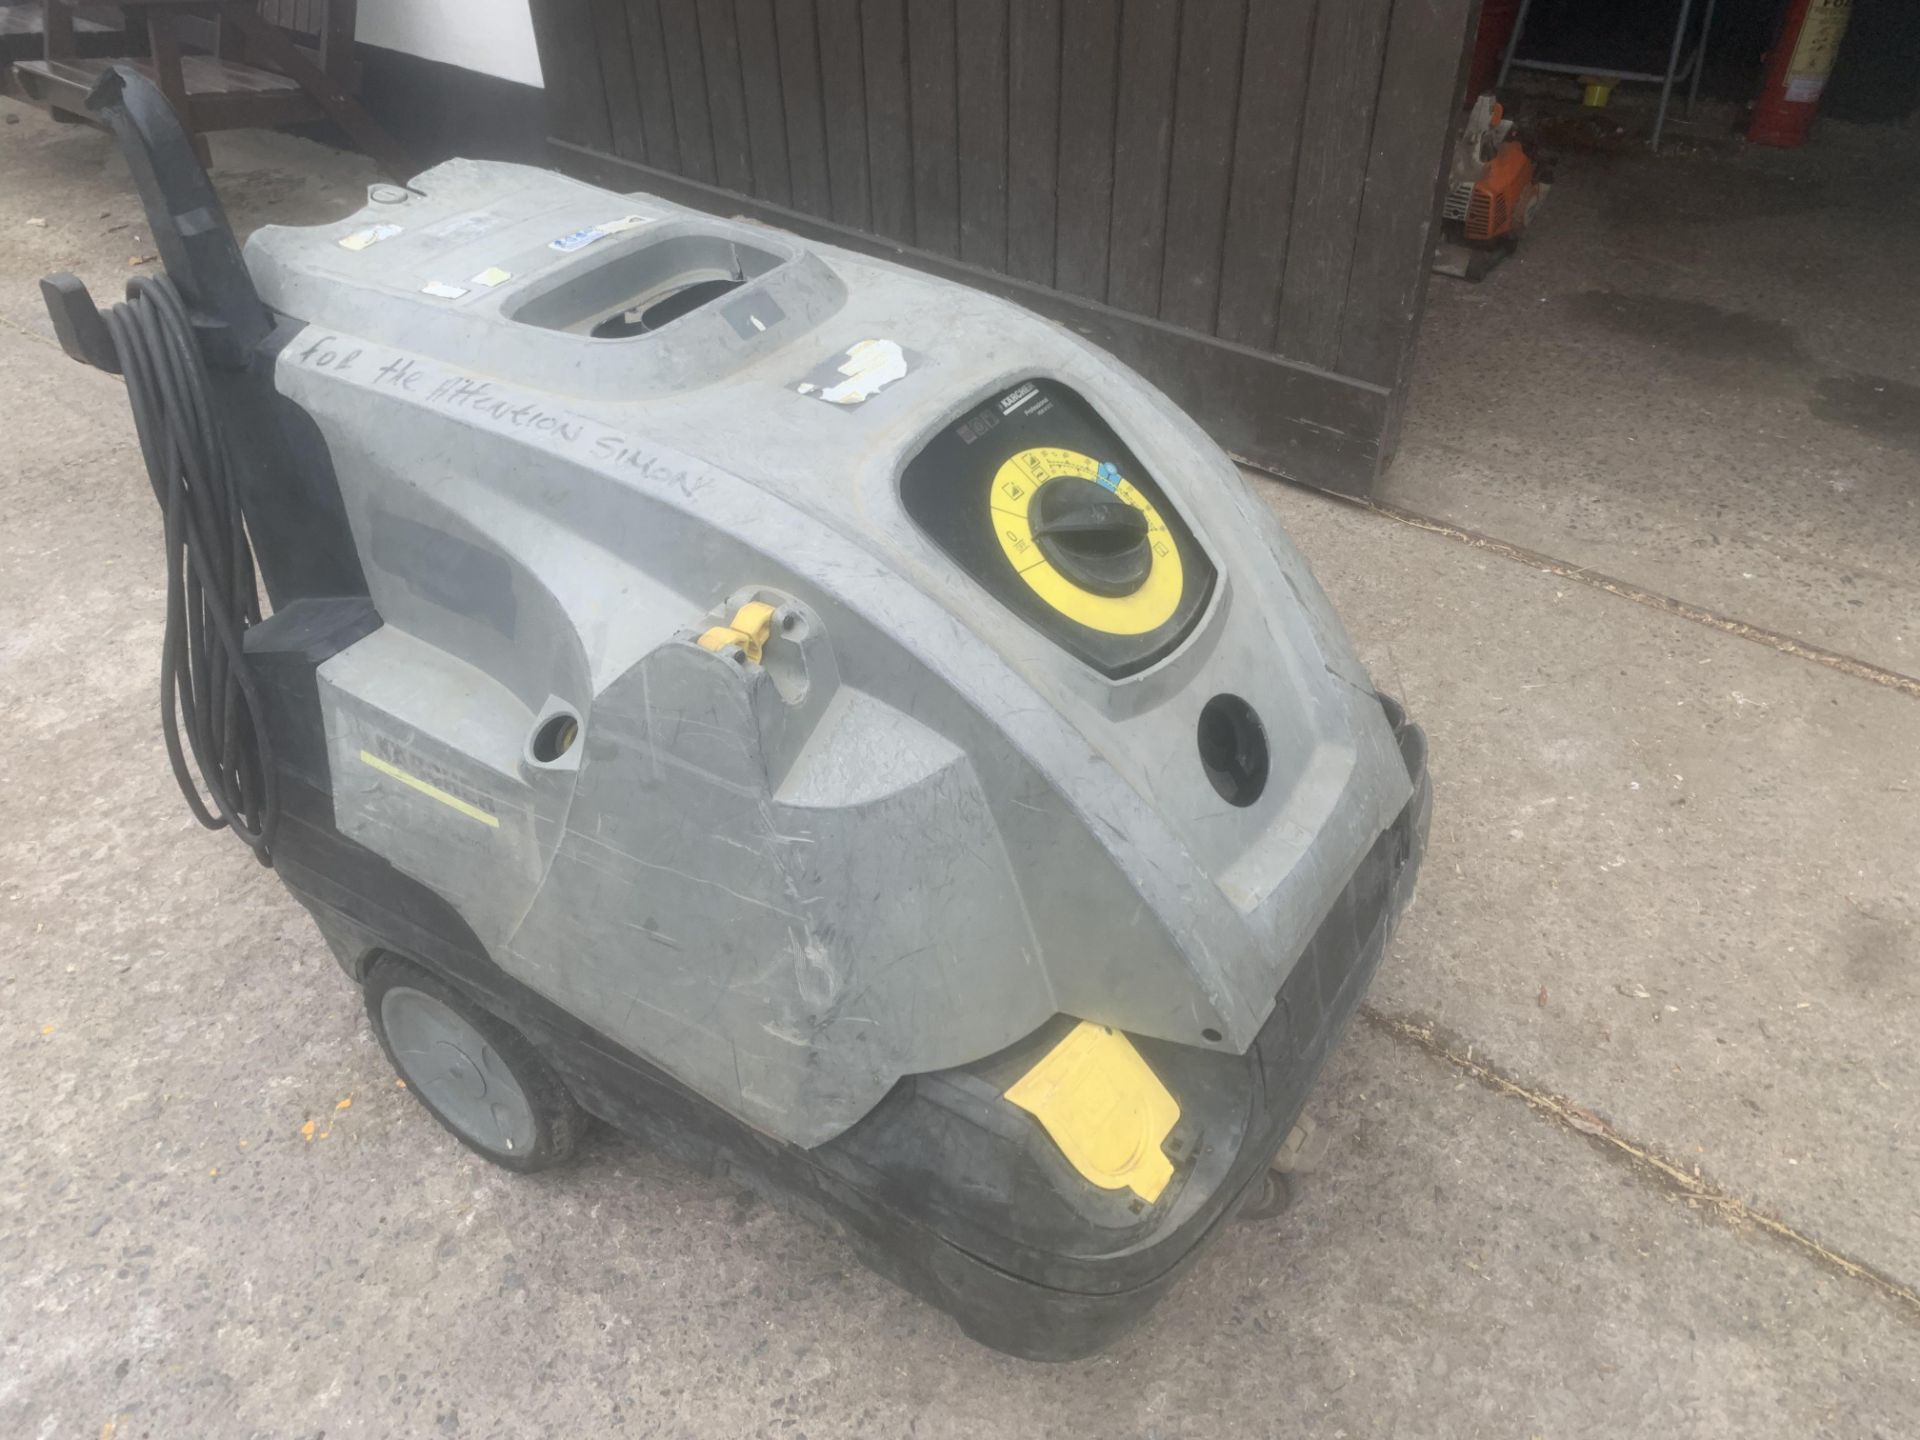 KARCHER PROFEESIONAL HOT AND COLD DIESEL POWER WASHER.LOCATION N IRELAND. - Image 5 of 7